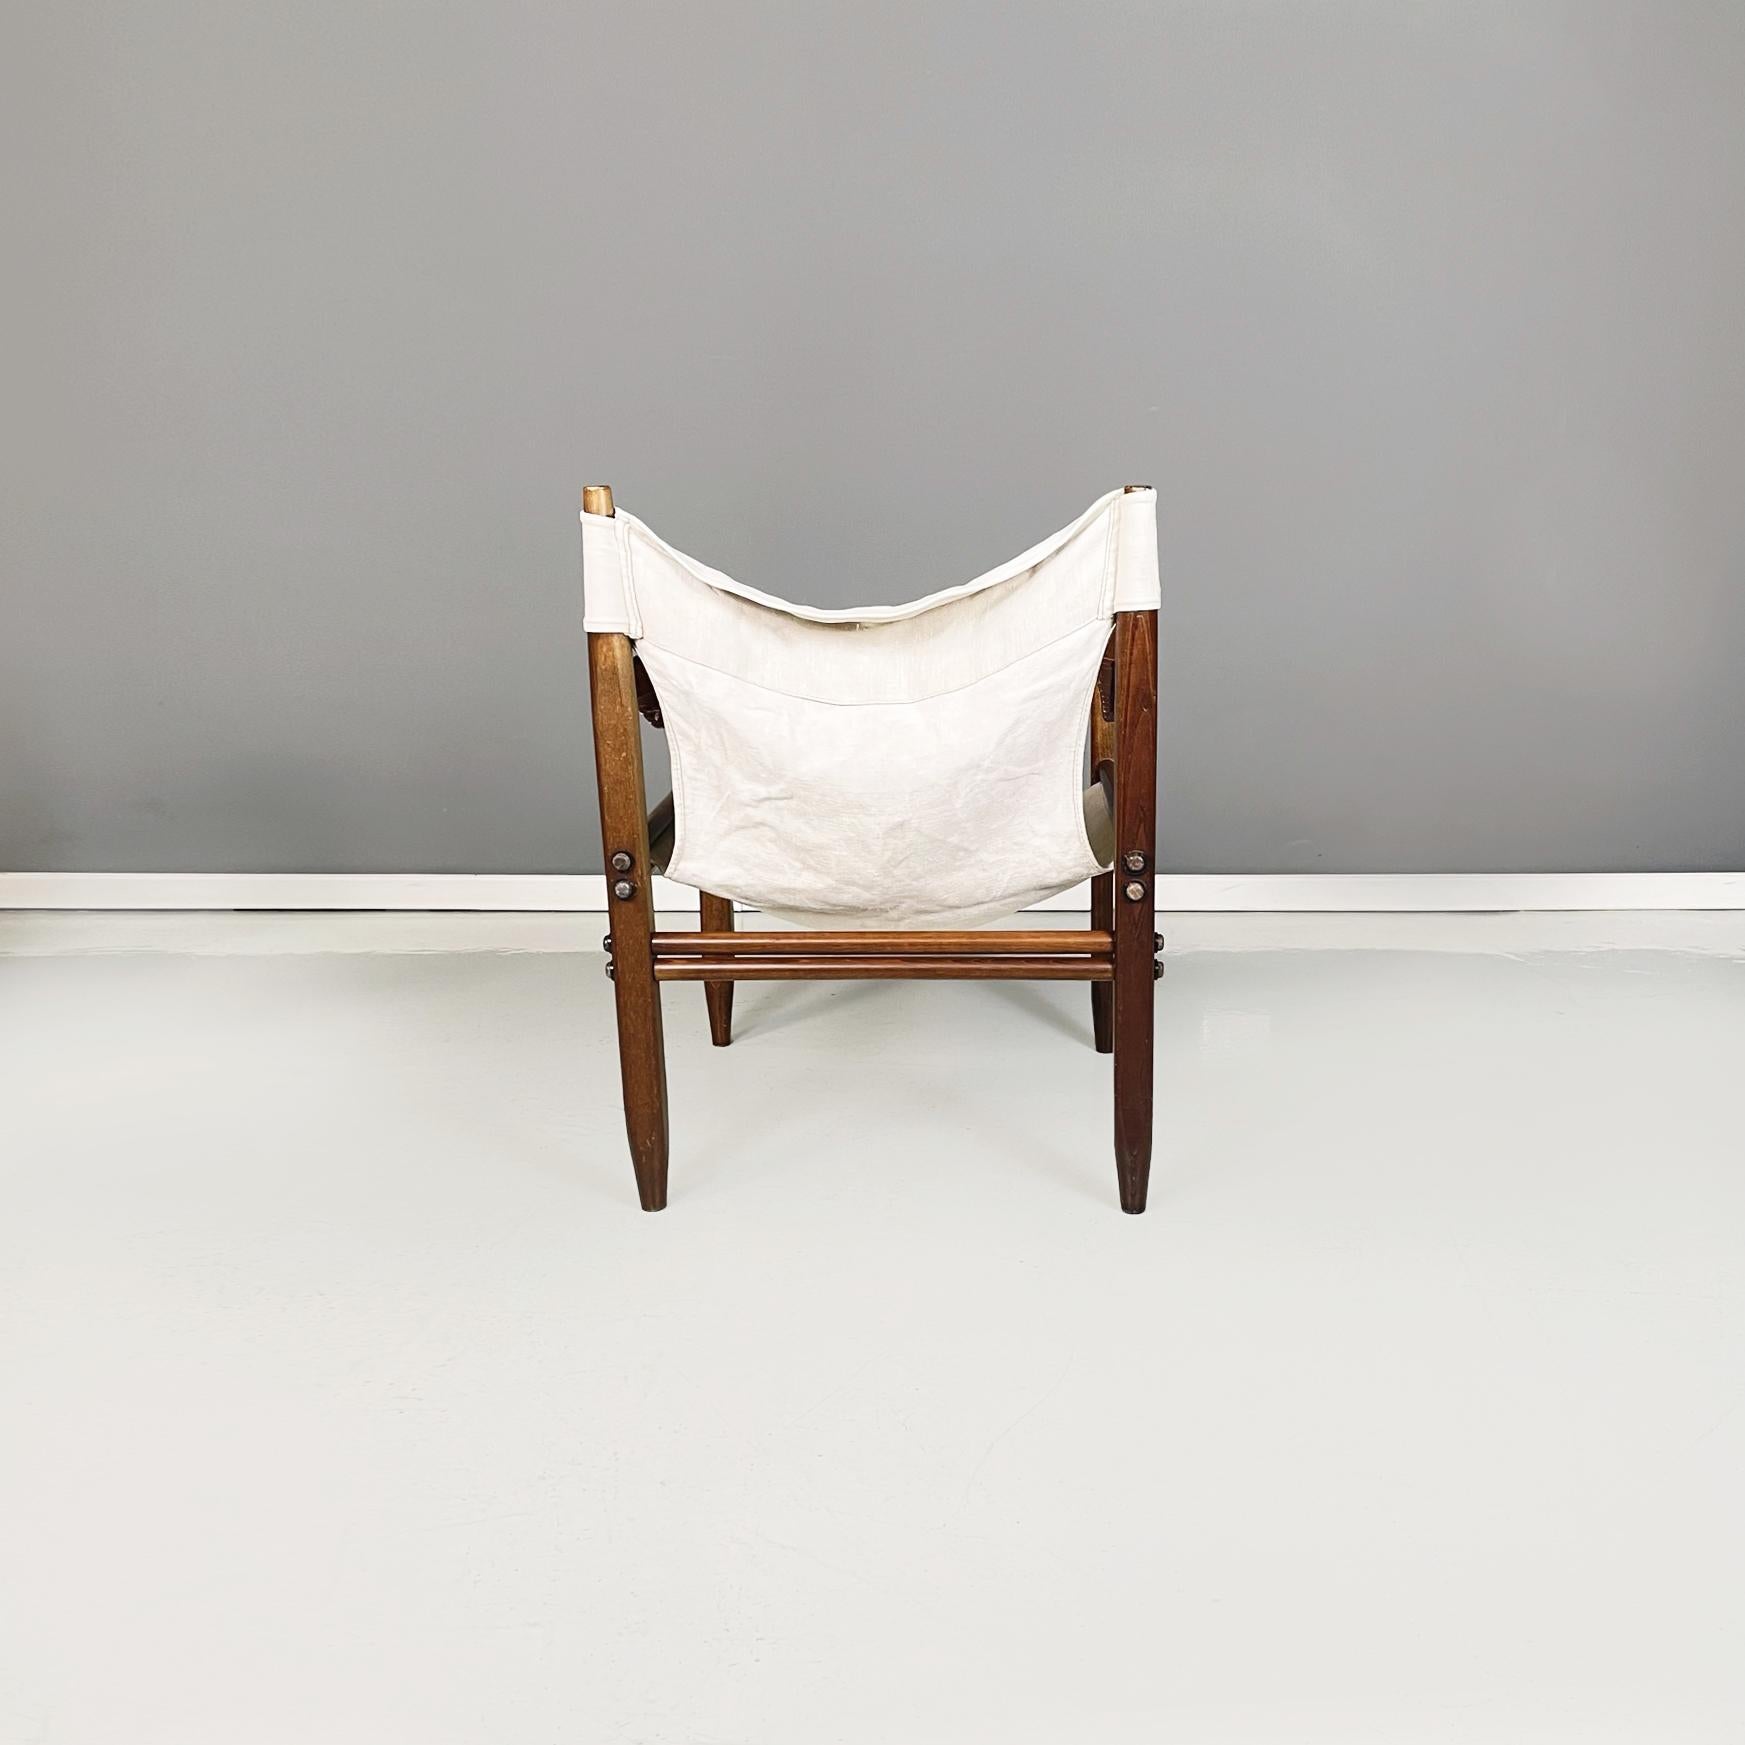 Leather Italian Midcentury Armchairs Oasi 85 by Gian Franco Legler for Zanotta, 1960s For Sale